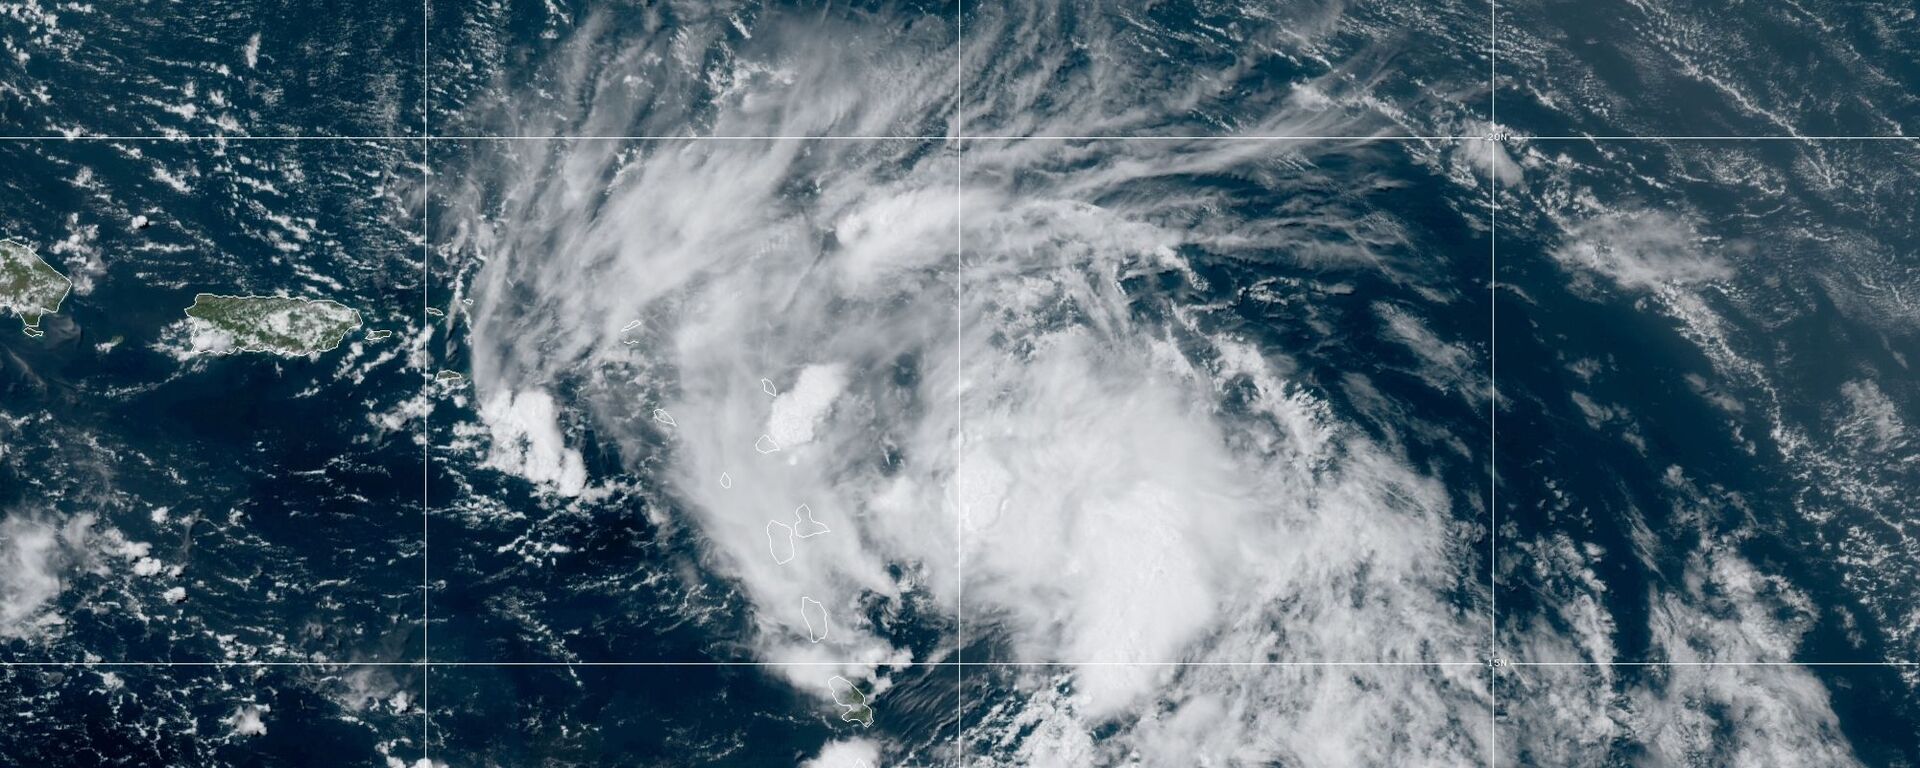 Satellite image released by the National Oceanic and Atmospheric Administration (NOAA) shows Tropical Storm Laura in the North Atlantic Ocean, Friday, Aug. 21, 2020.  - Sputnik International, 1920, 27.02.2021